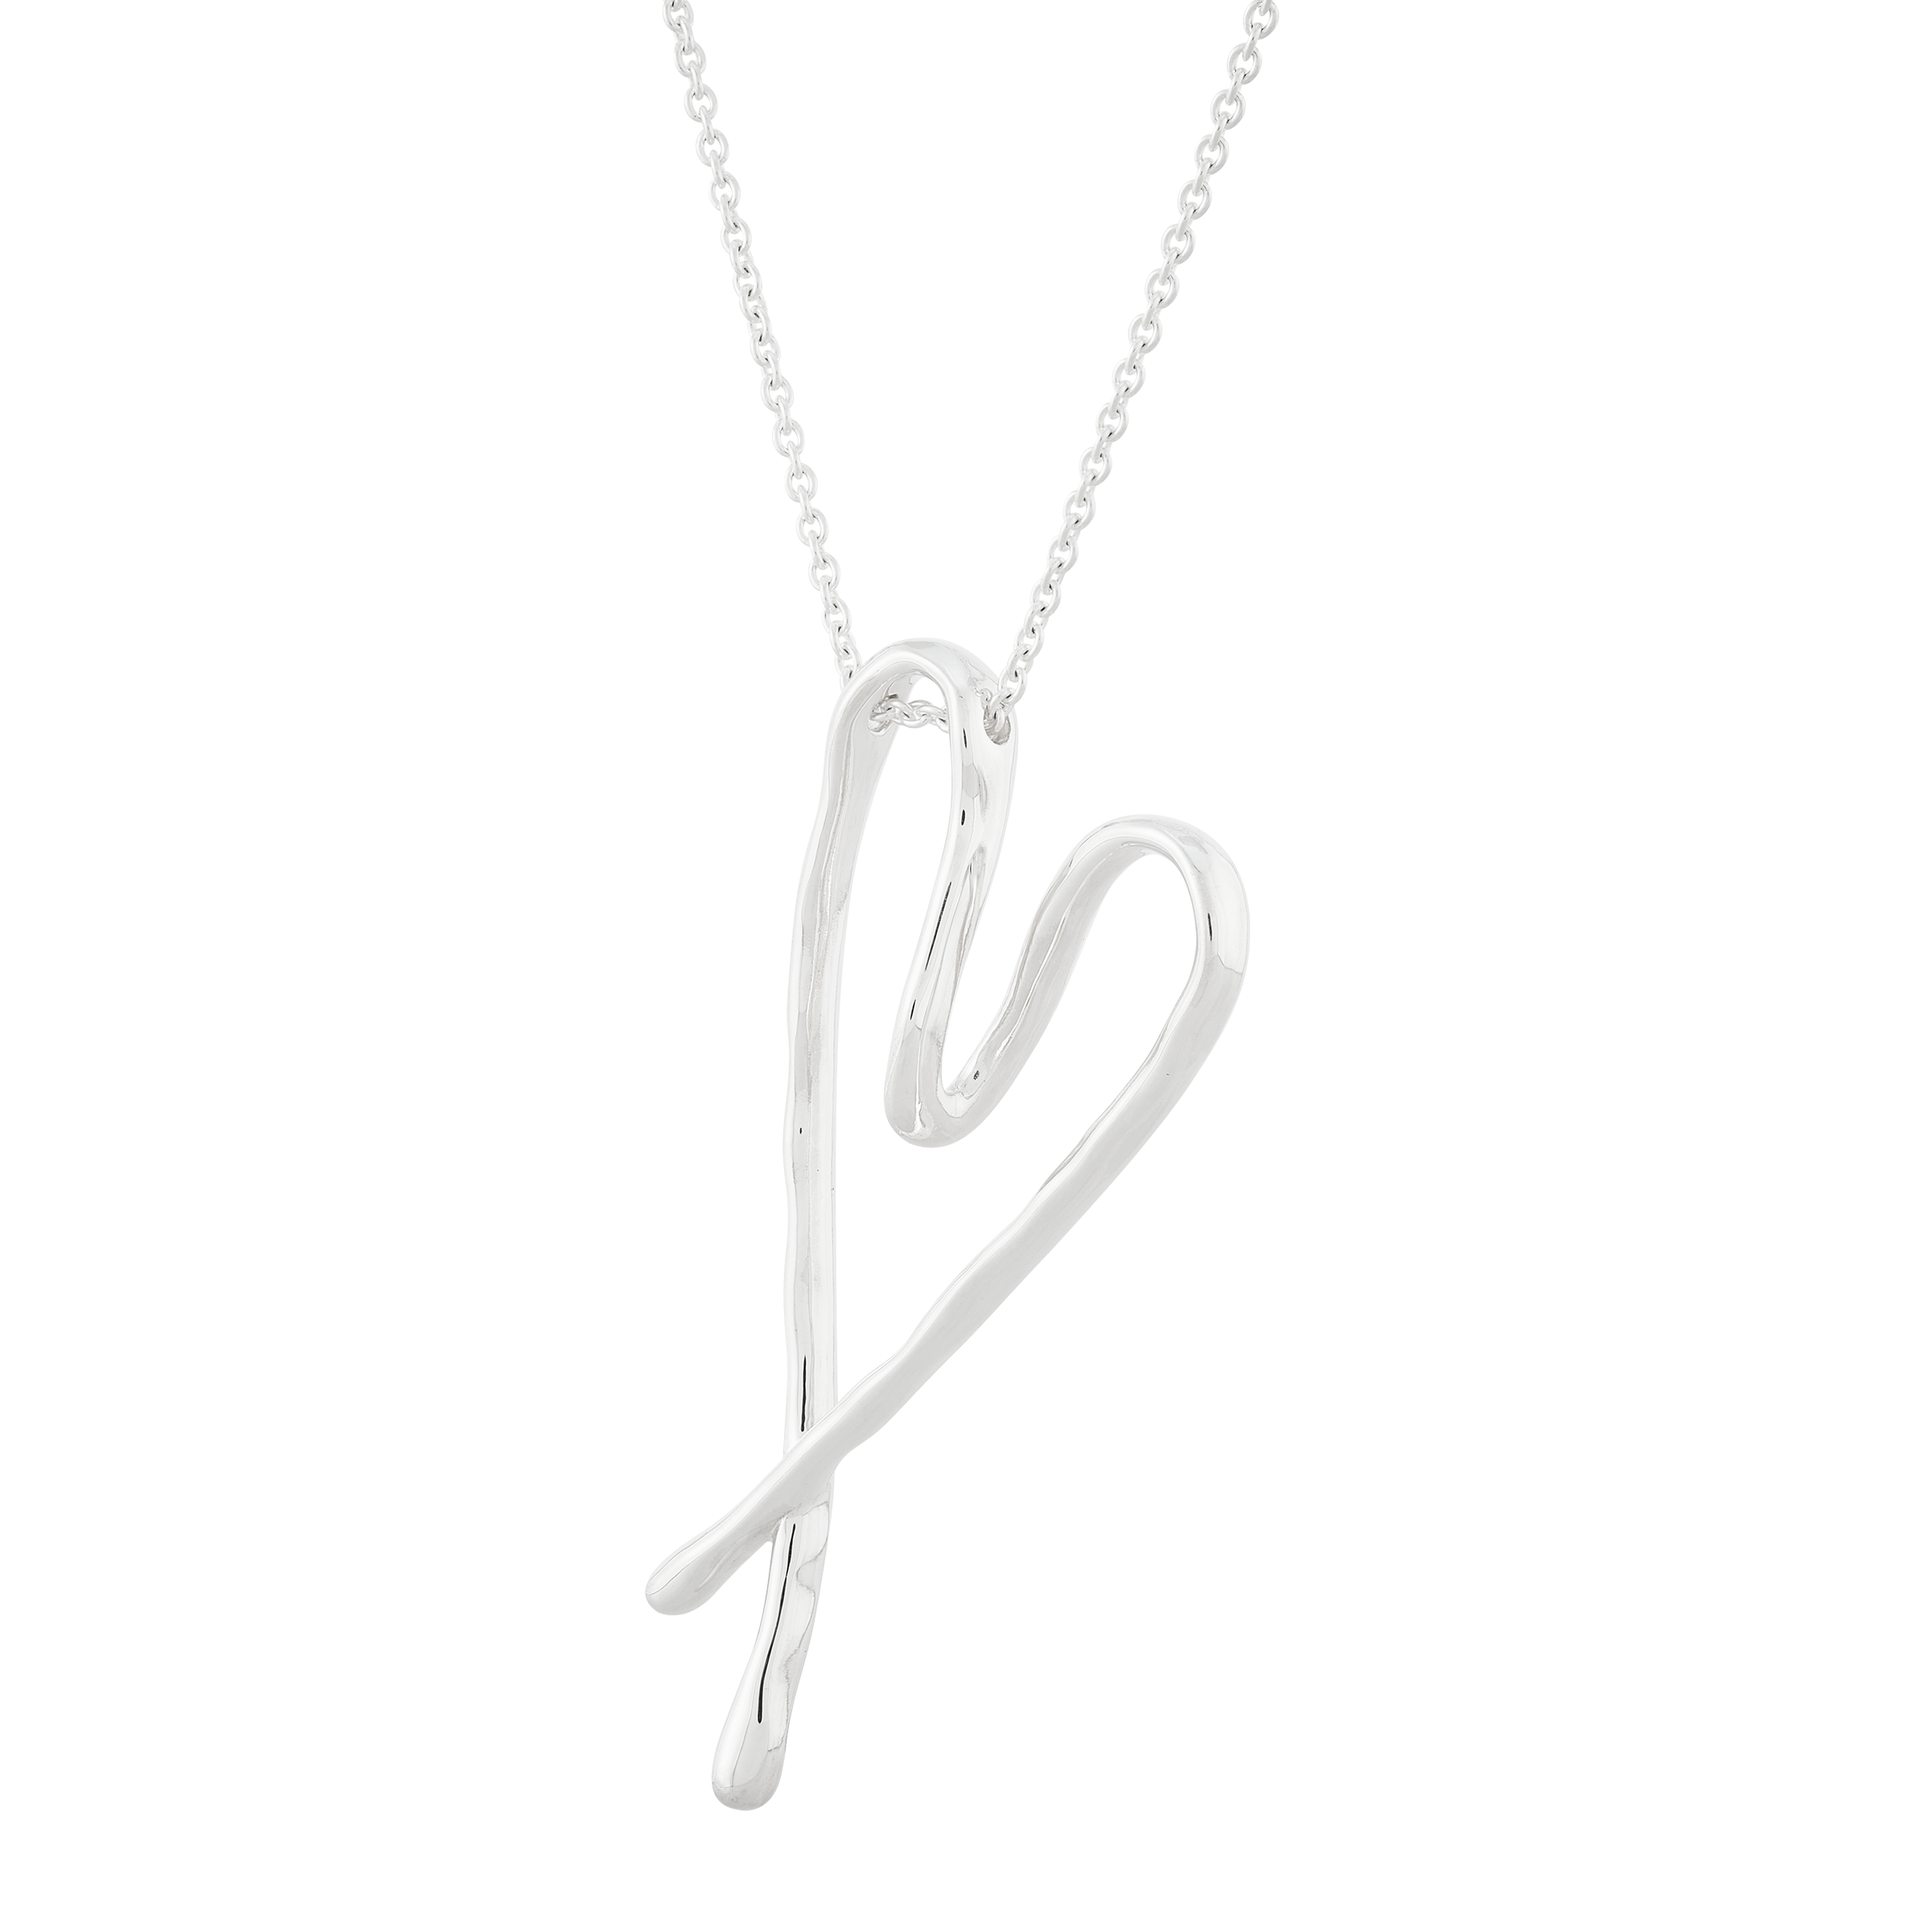 Silpada 'Love Song' Sterling Silver Pendant Necklace, 28